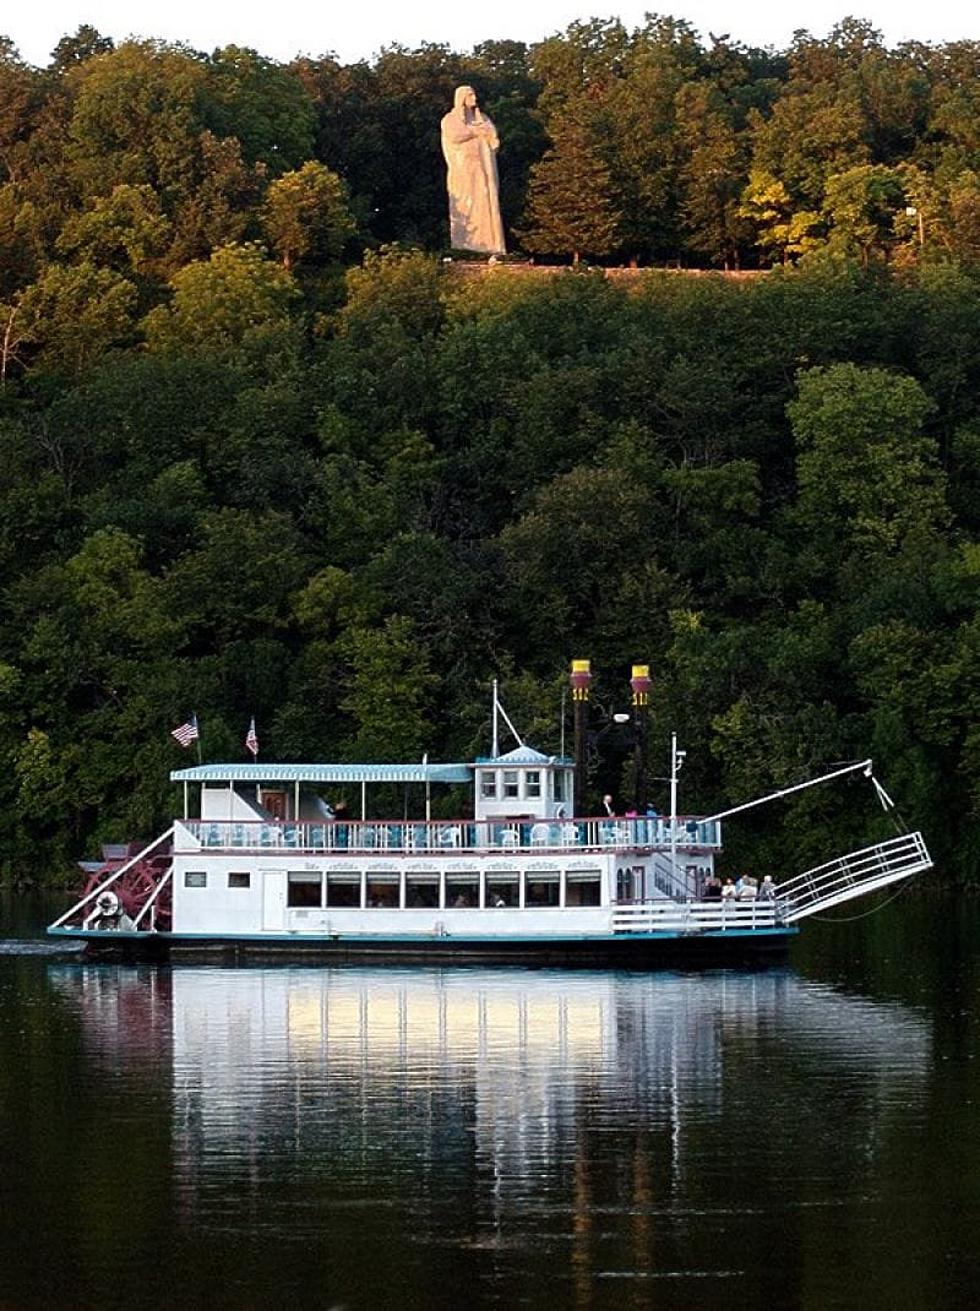 Enjoy a Unique Dining Experience on the River in Oregon This Summer